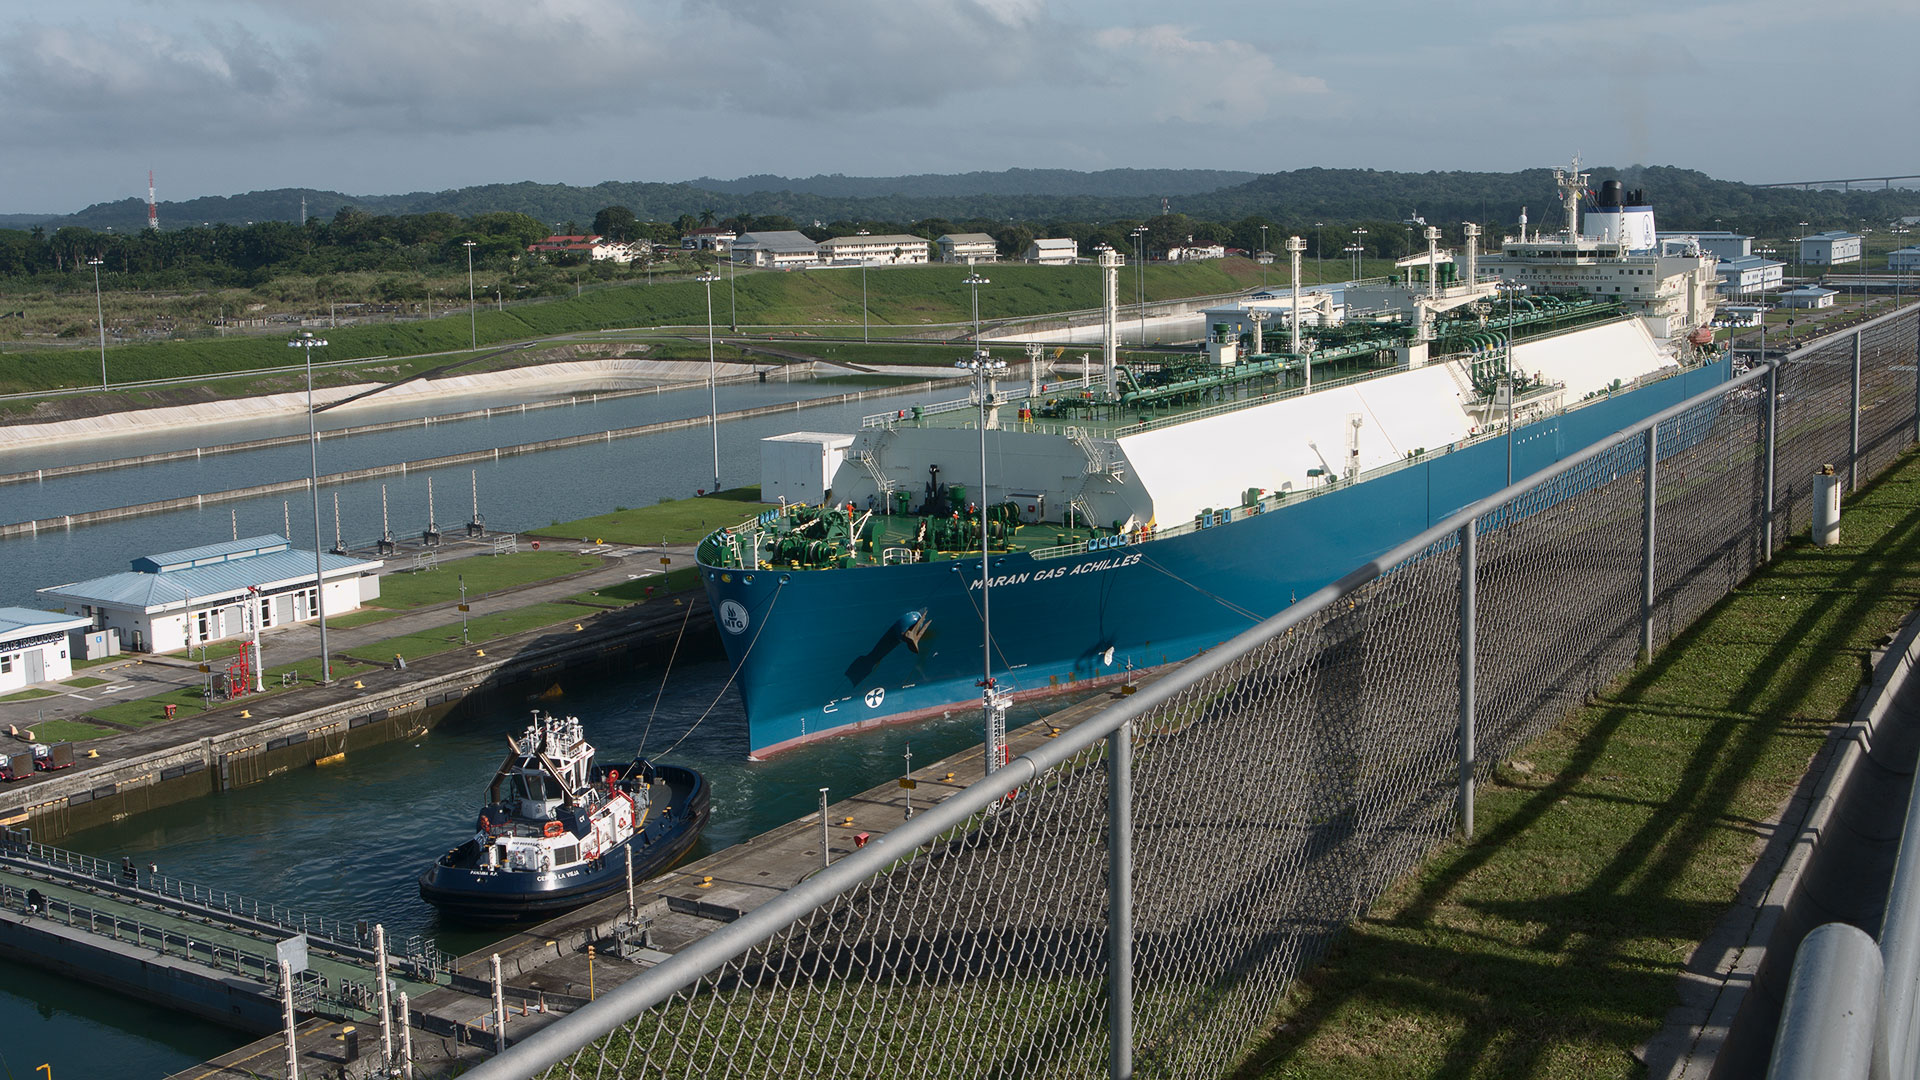 a view of a commerical vessel inside the southernmost chamber of Agua Clara Locks, in the Panama Canal.